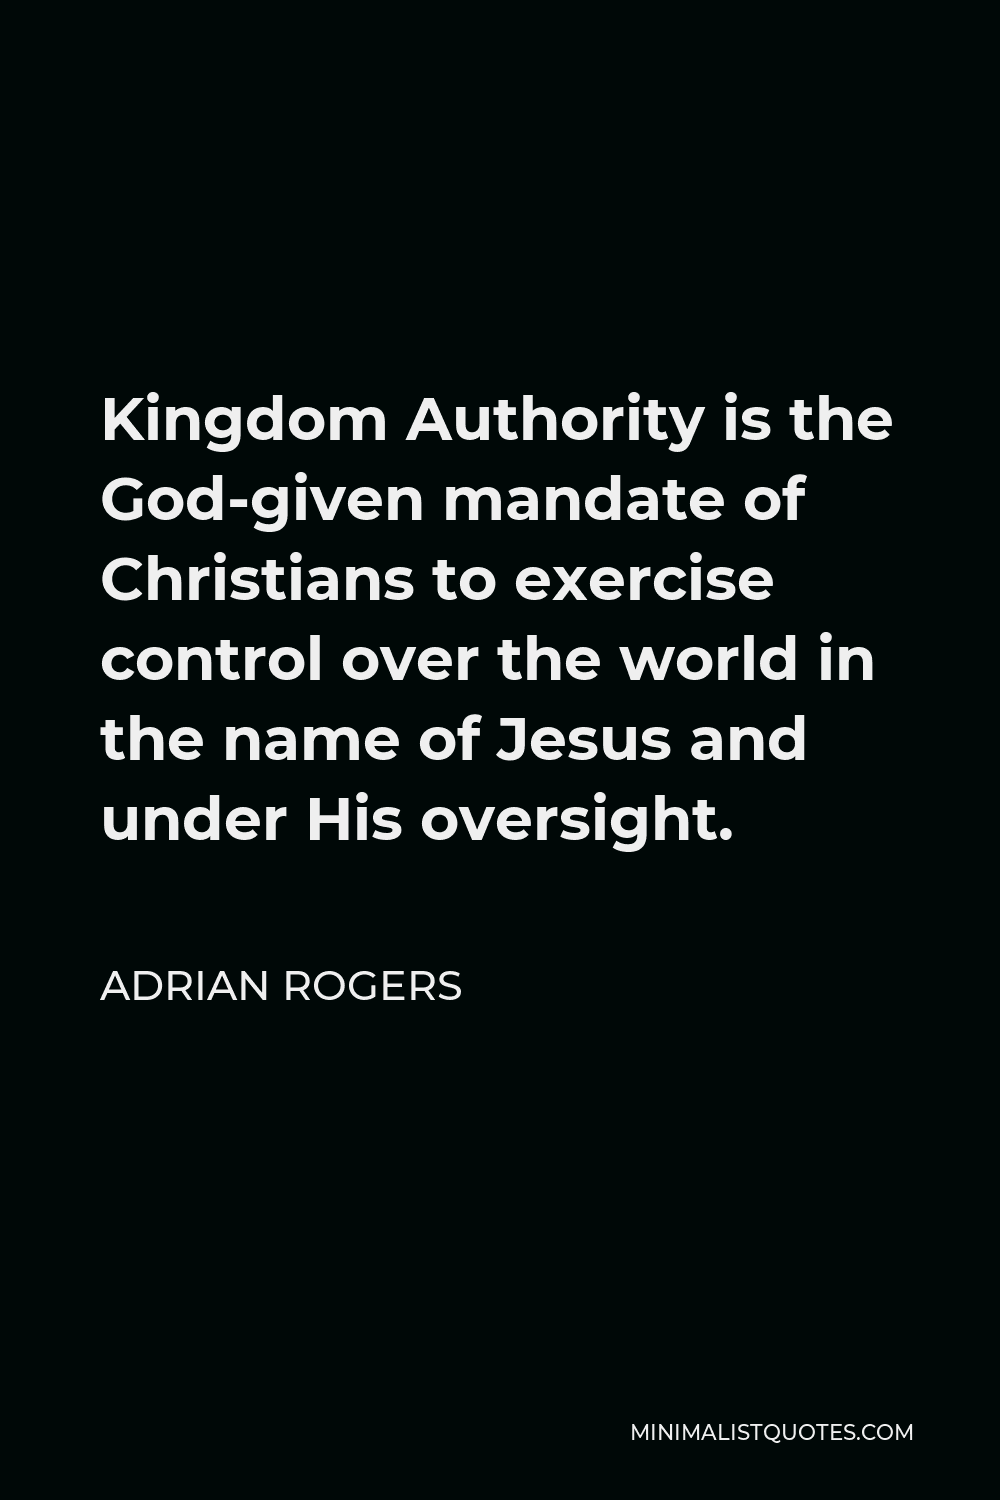 Adrian Rogers Quote - Kingdom Authority is the God-given mandate of Christians to exercise control over the world in the name of Jesus and under His oversight.